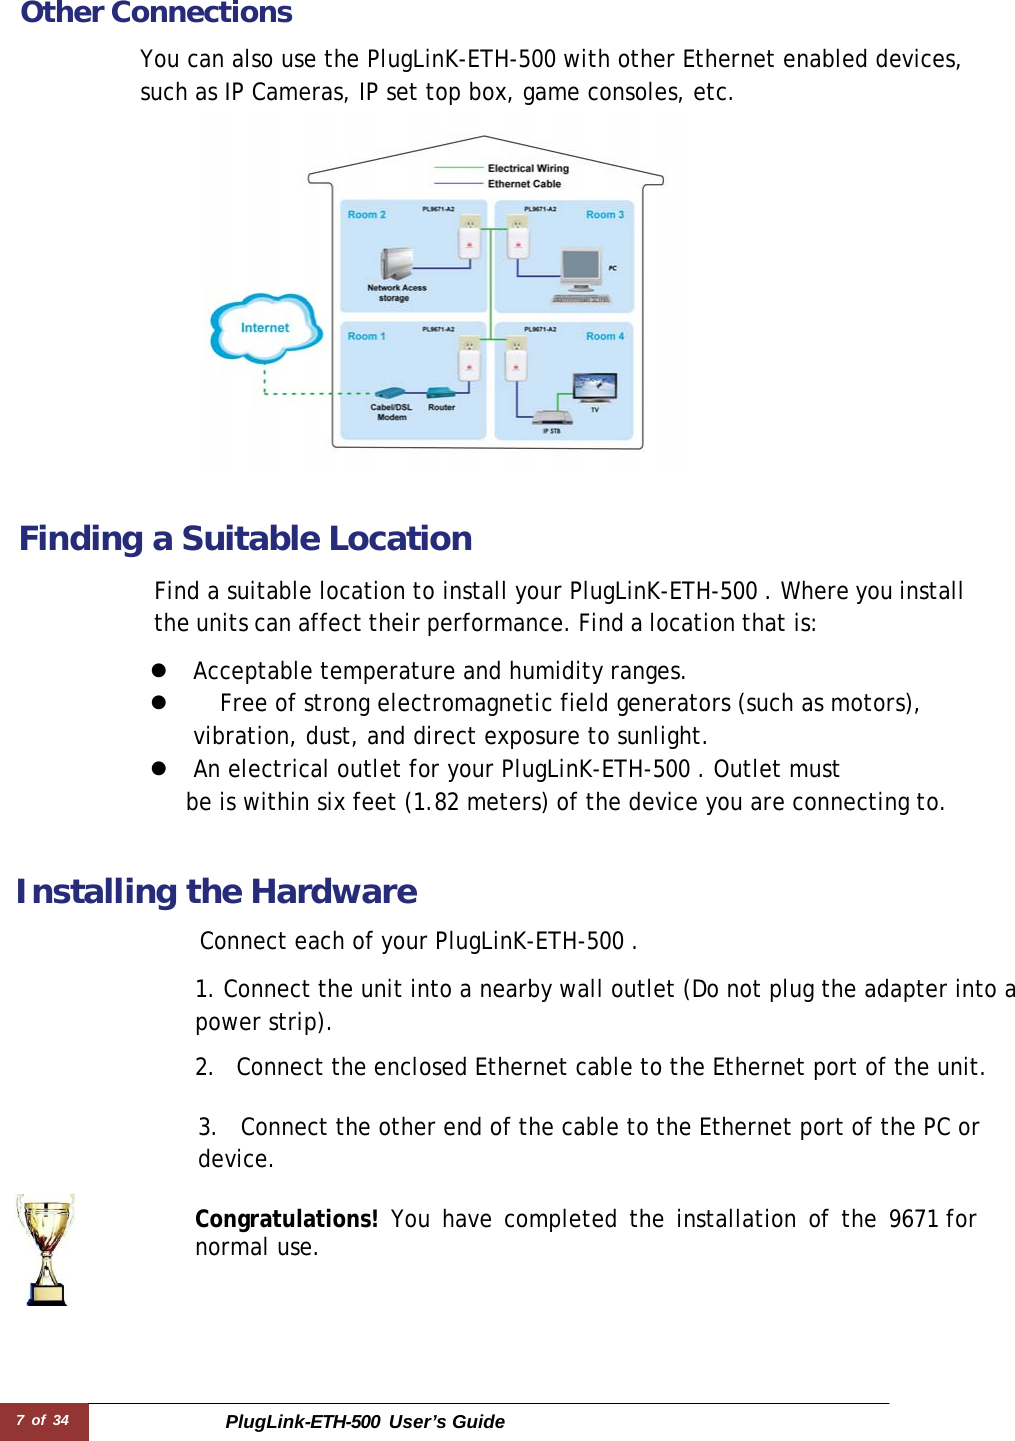 7 of 34 PlugLink-ETH-500  User’s Guide   Other Connections  You can also use the PlugLinK-ETH-500 with other Ethernet enabled devices, such as IP Cameras, IP set top box, game consoles, etc.    Finding a Suitable Location  Find a suitable location to install your PlugLinK-ETH-500 . Where you install the units can affect their performance. Find a location that is:  z  Acceptable temperature and humidity ranges. z    Free of strong electromagnetic field generators (such as motors), vibration, dust, and direct exposure to sunlight. z  An electrical outlet for your PlugLinK-ETH-500 . Outlet must be is within six feet (1.82 meters) of the device you are connecting to.    Installing the Hardware  Connect each of your PlugLinK-ETH-500 .  1. Connect the unit into a nearby wall outlet (Do not plug the adapter into a power strip).  2.  Connect the enclosed Ethernet cable to the Ethernet port of the unit.   3.  Connect the other end of the cable to the Ethernet port of the PC or device.  Congratulations! You have completed the installation of the 9671 for normal use. 